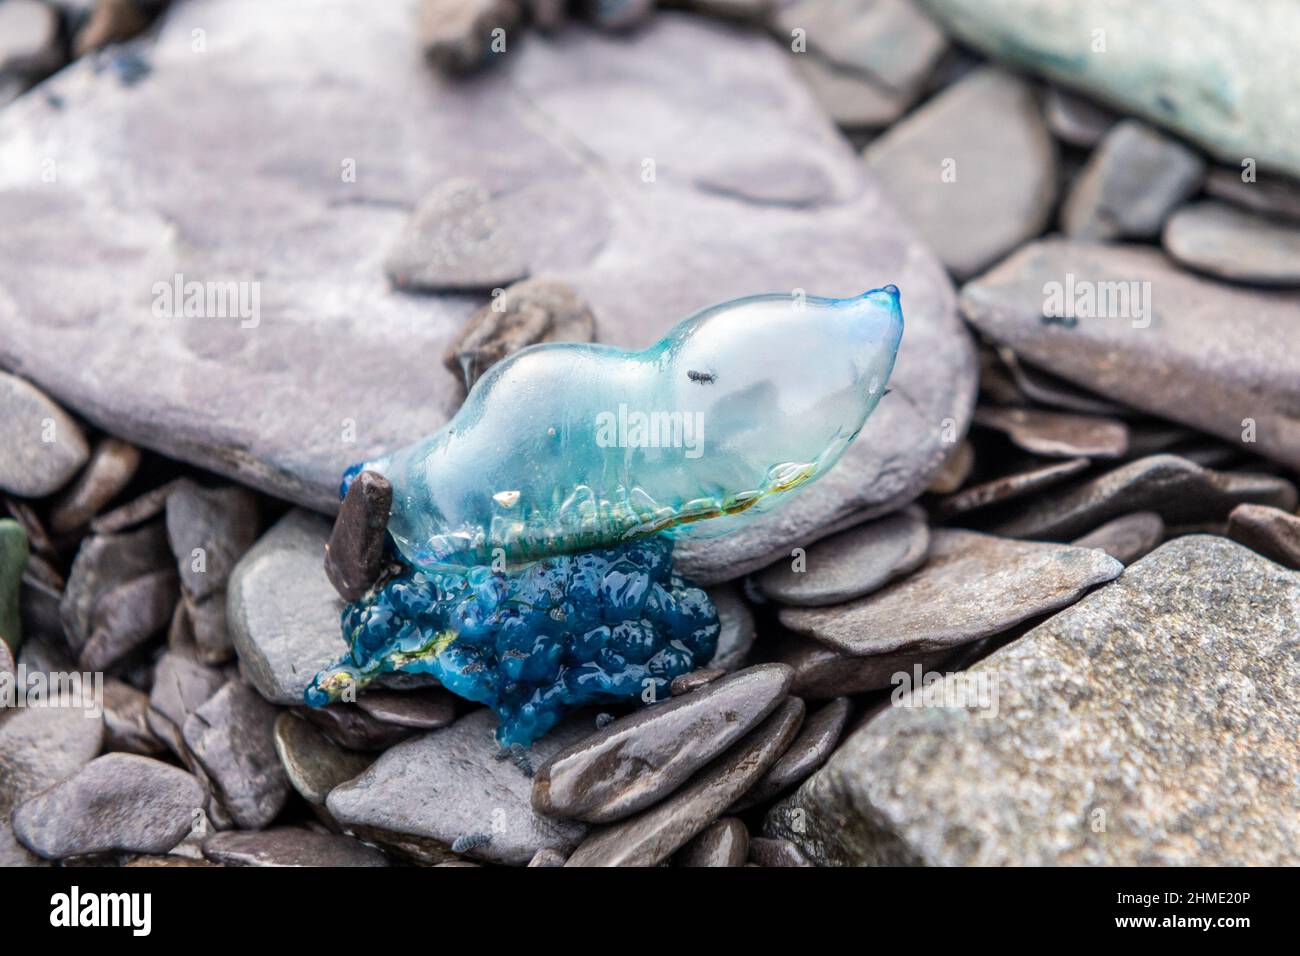 Reen Pier, West Cork, Ireland. 9th Feb, 2022. A Portuguese Man of War has washed up on the shingle beach at Reen Pier today. The jellyfish is a mere 3 inches long but packs a severe sting, which although excruciatingly painful, very rarely kills. Credit: AG News/Alamy Live News Stock Photo